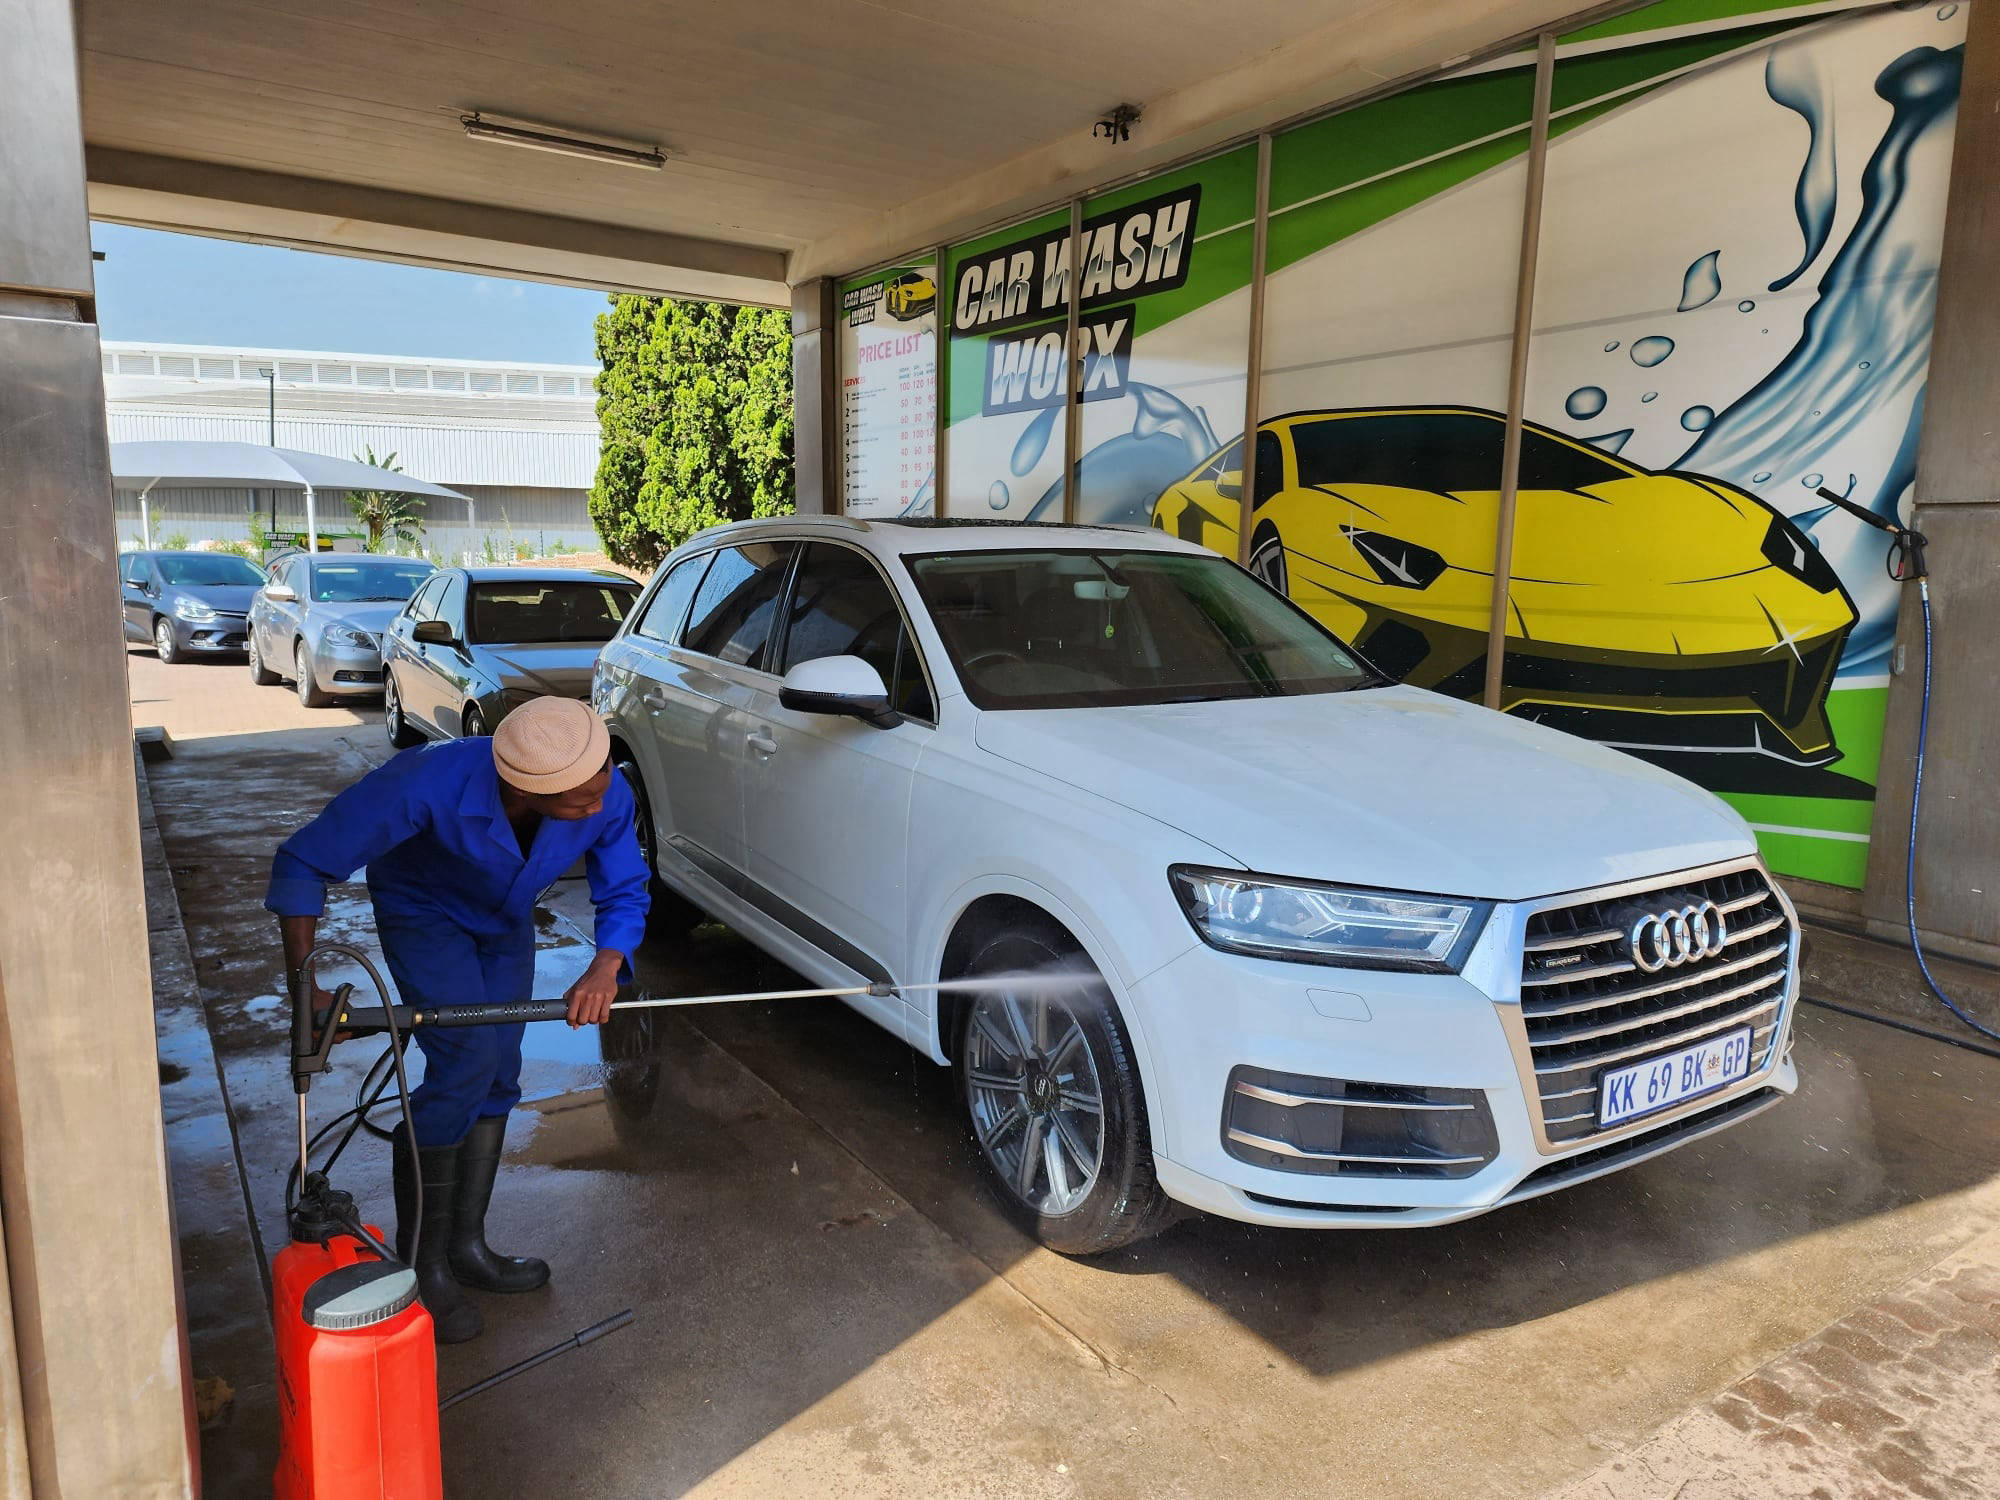 Caltex Midrand CarWash Worx Branch, Car Wash Franchises Available, CarWash Worx Head Office, Join The Leading Car Wash Franchising Group, Start Your Own Successful Car Wash Business Now